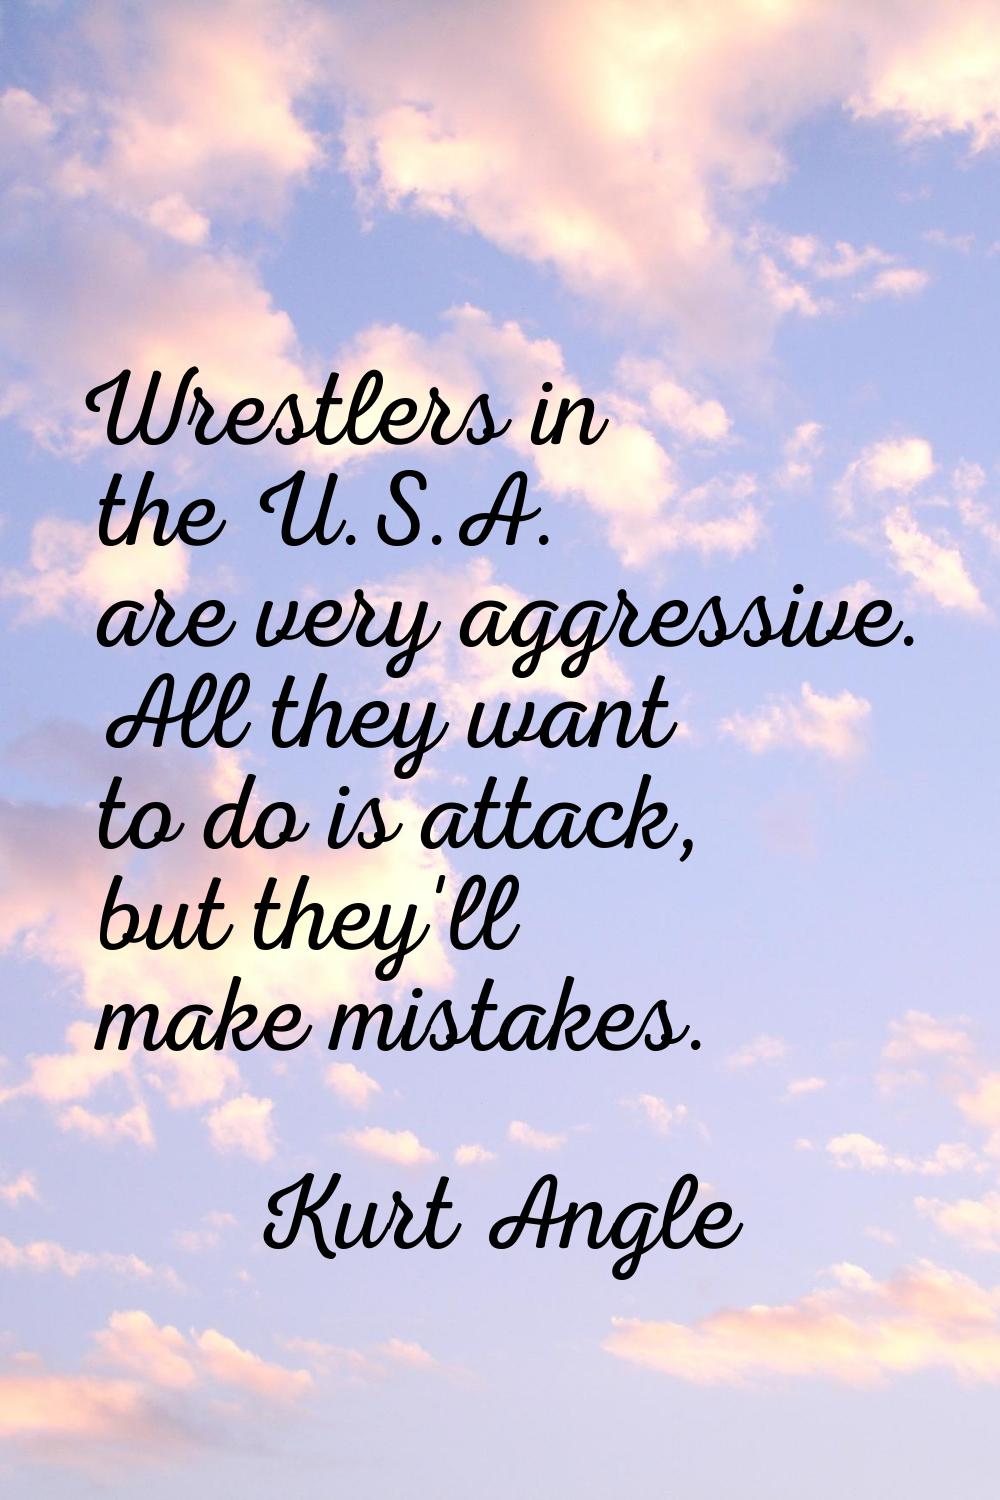 Wrestlers in the U.S.A. are very aggressive. All they want to do is attack, but they'll make mistak